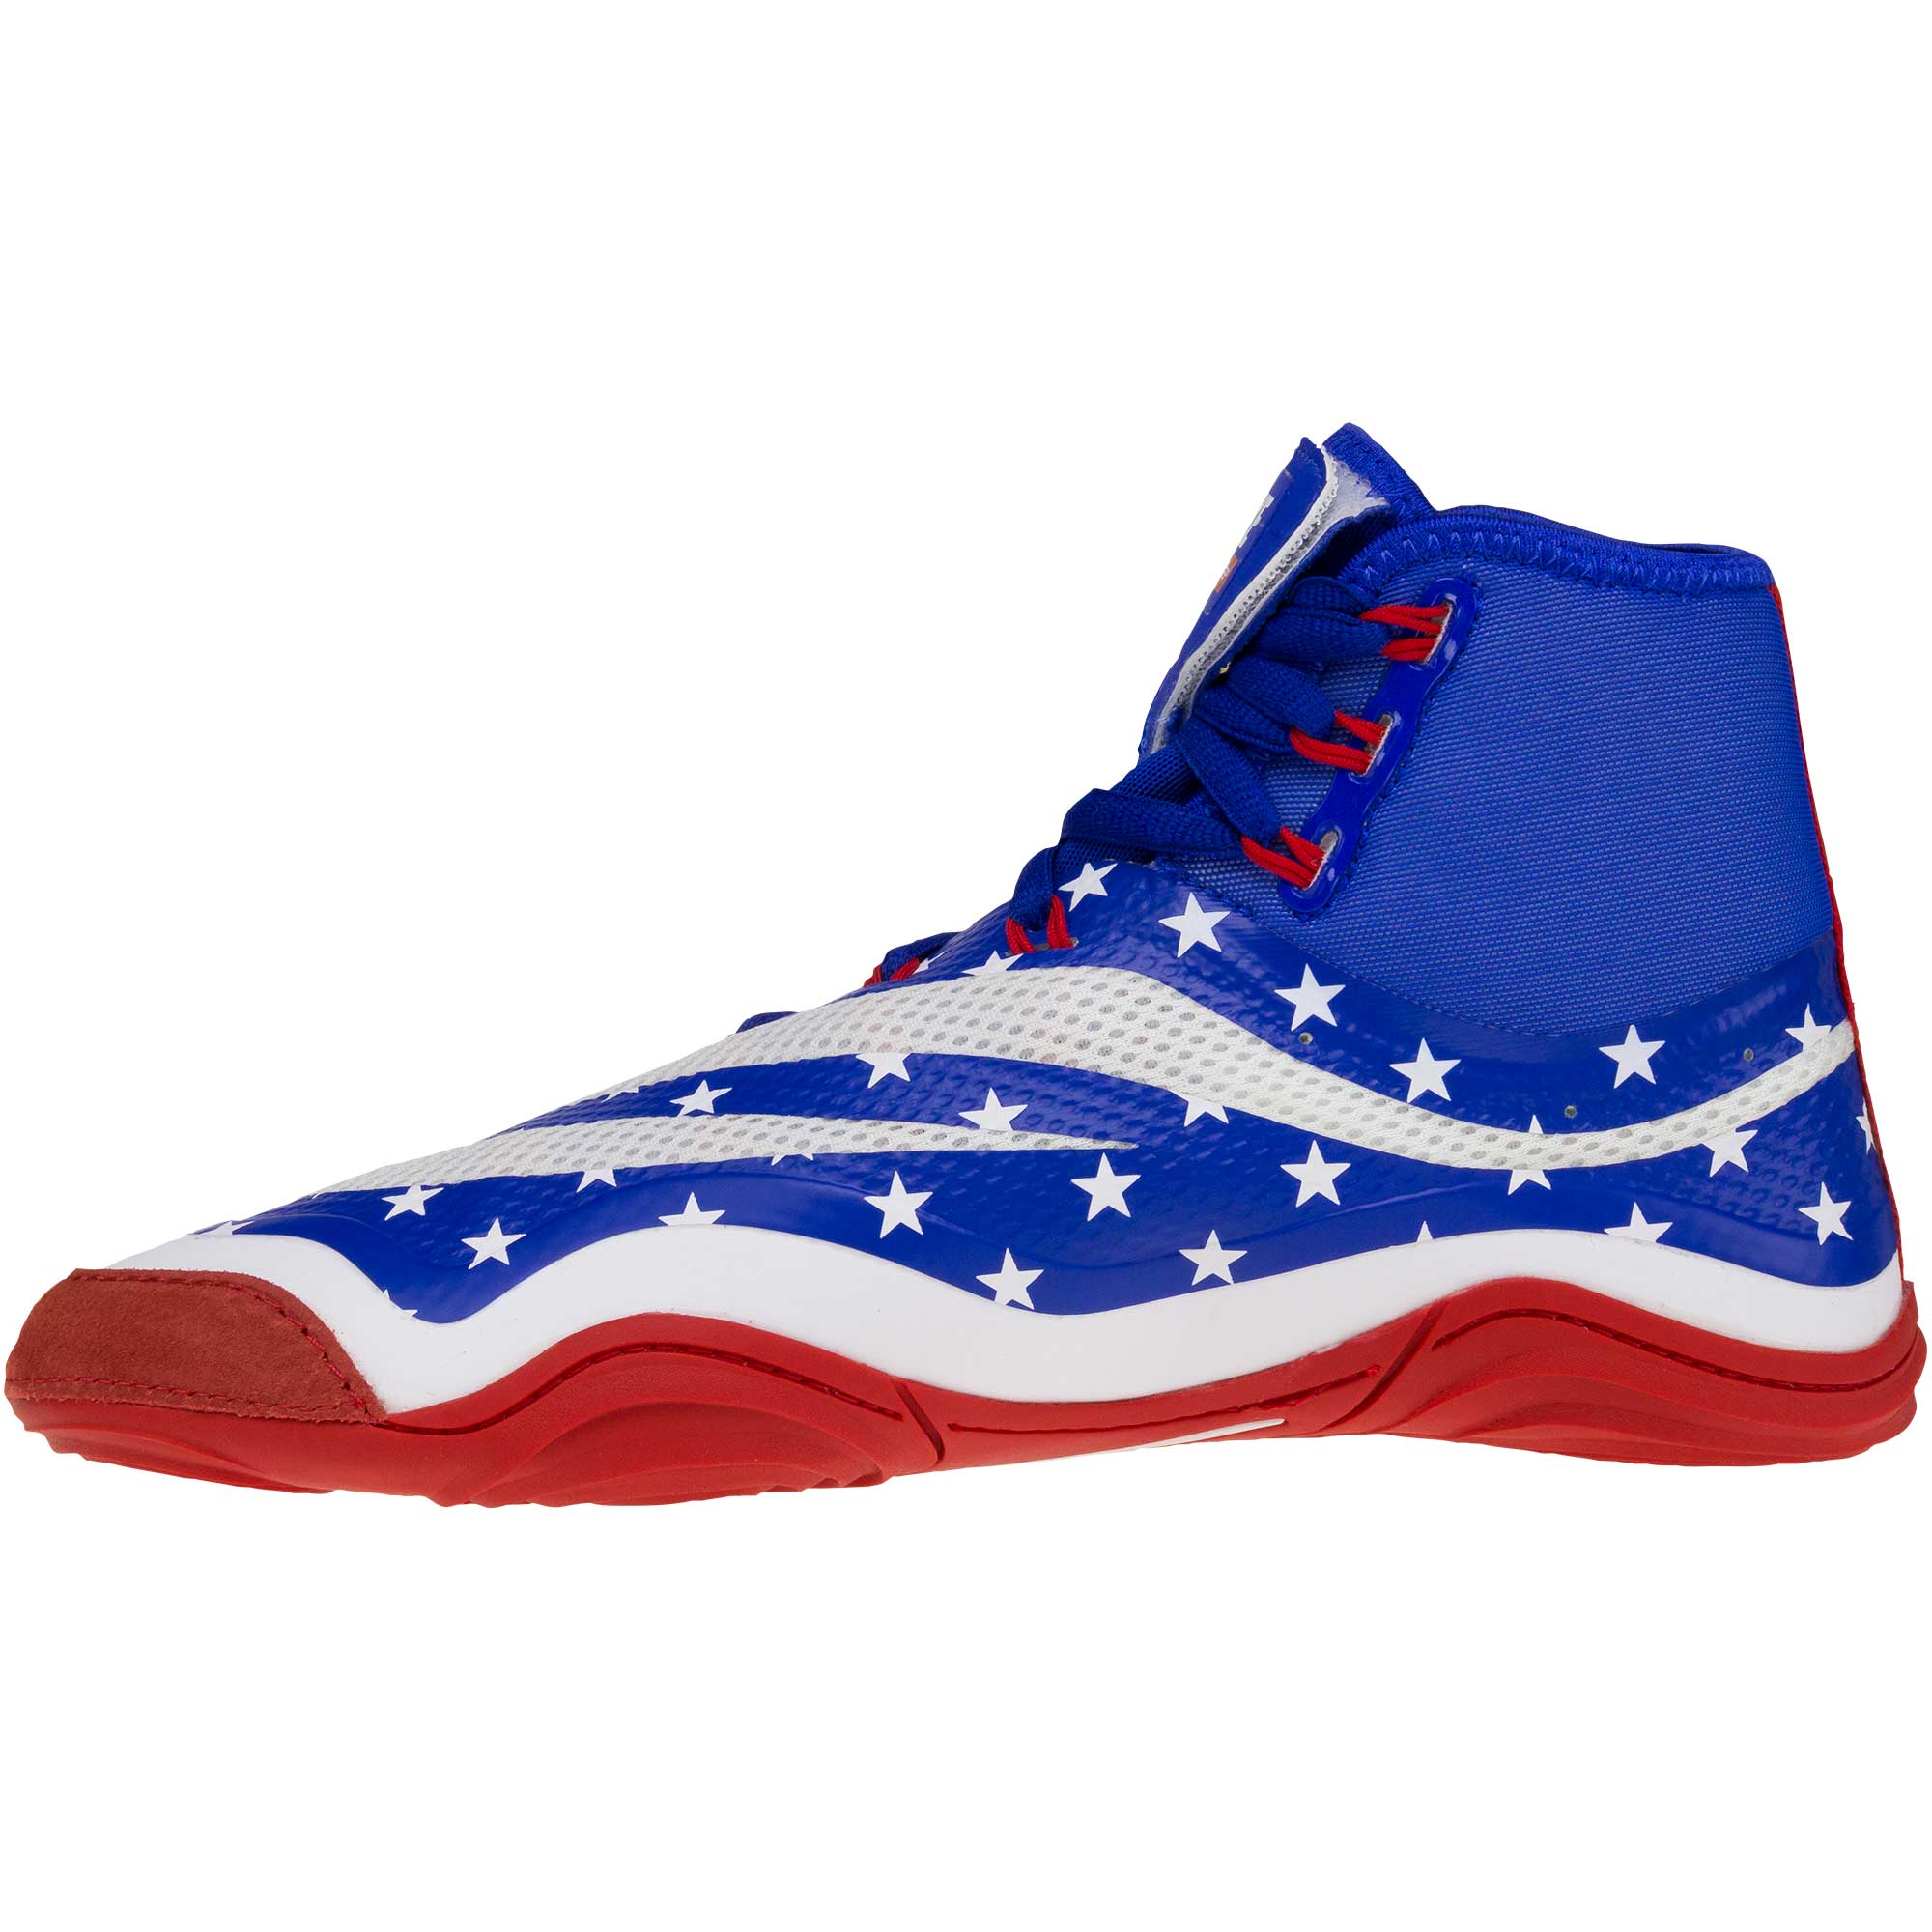 Red White and Blue Nike Logo - Nike Hypersweep Shoes | WrestlingMart | Free Shipping